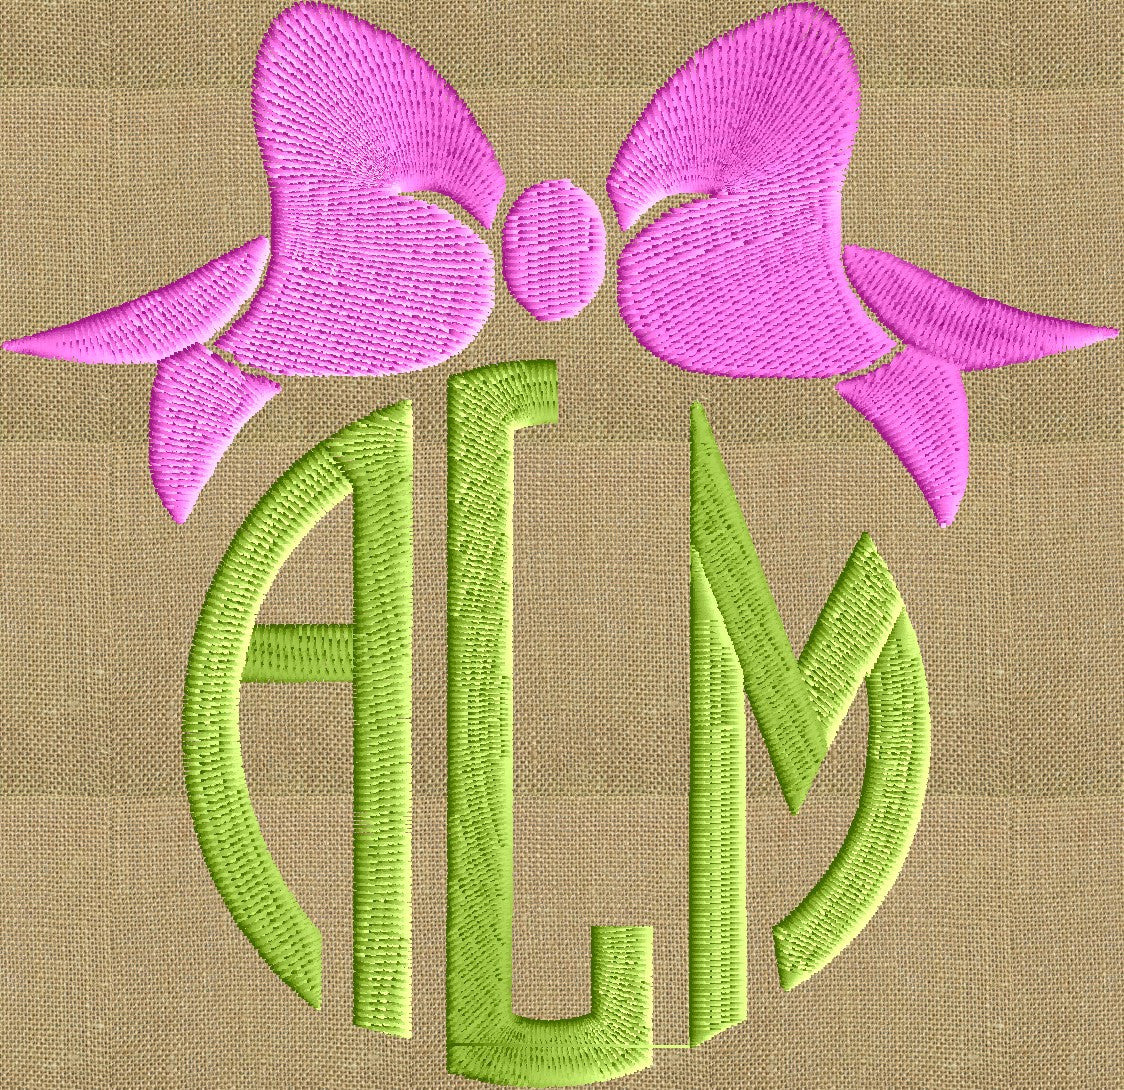 Bow Font Frame Monogram Embroidery Design - Font not included - Instant download